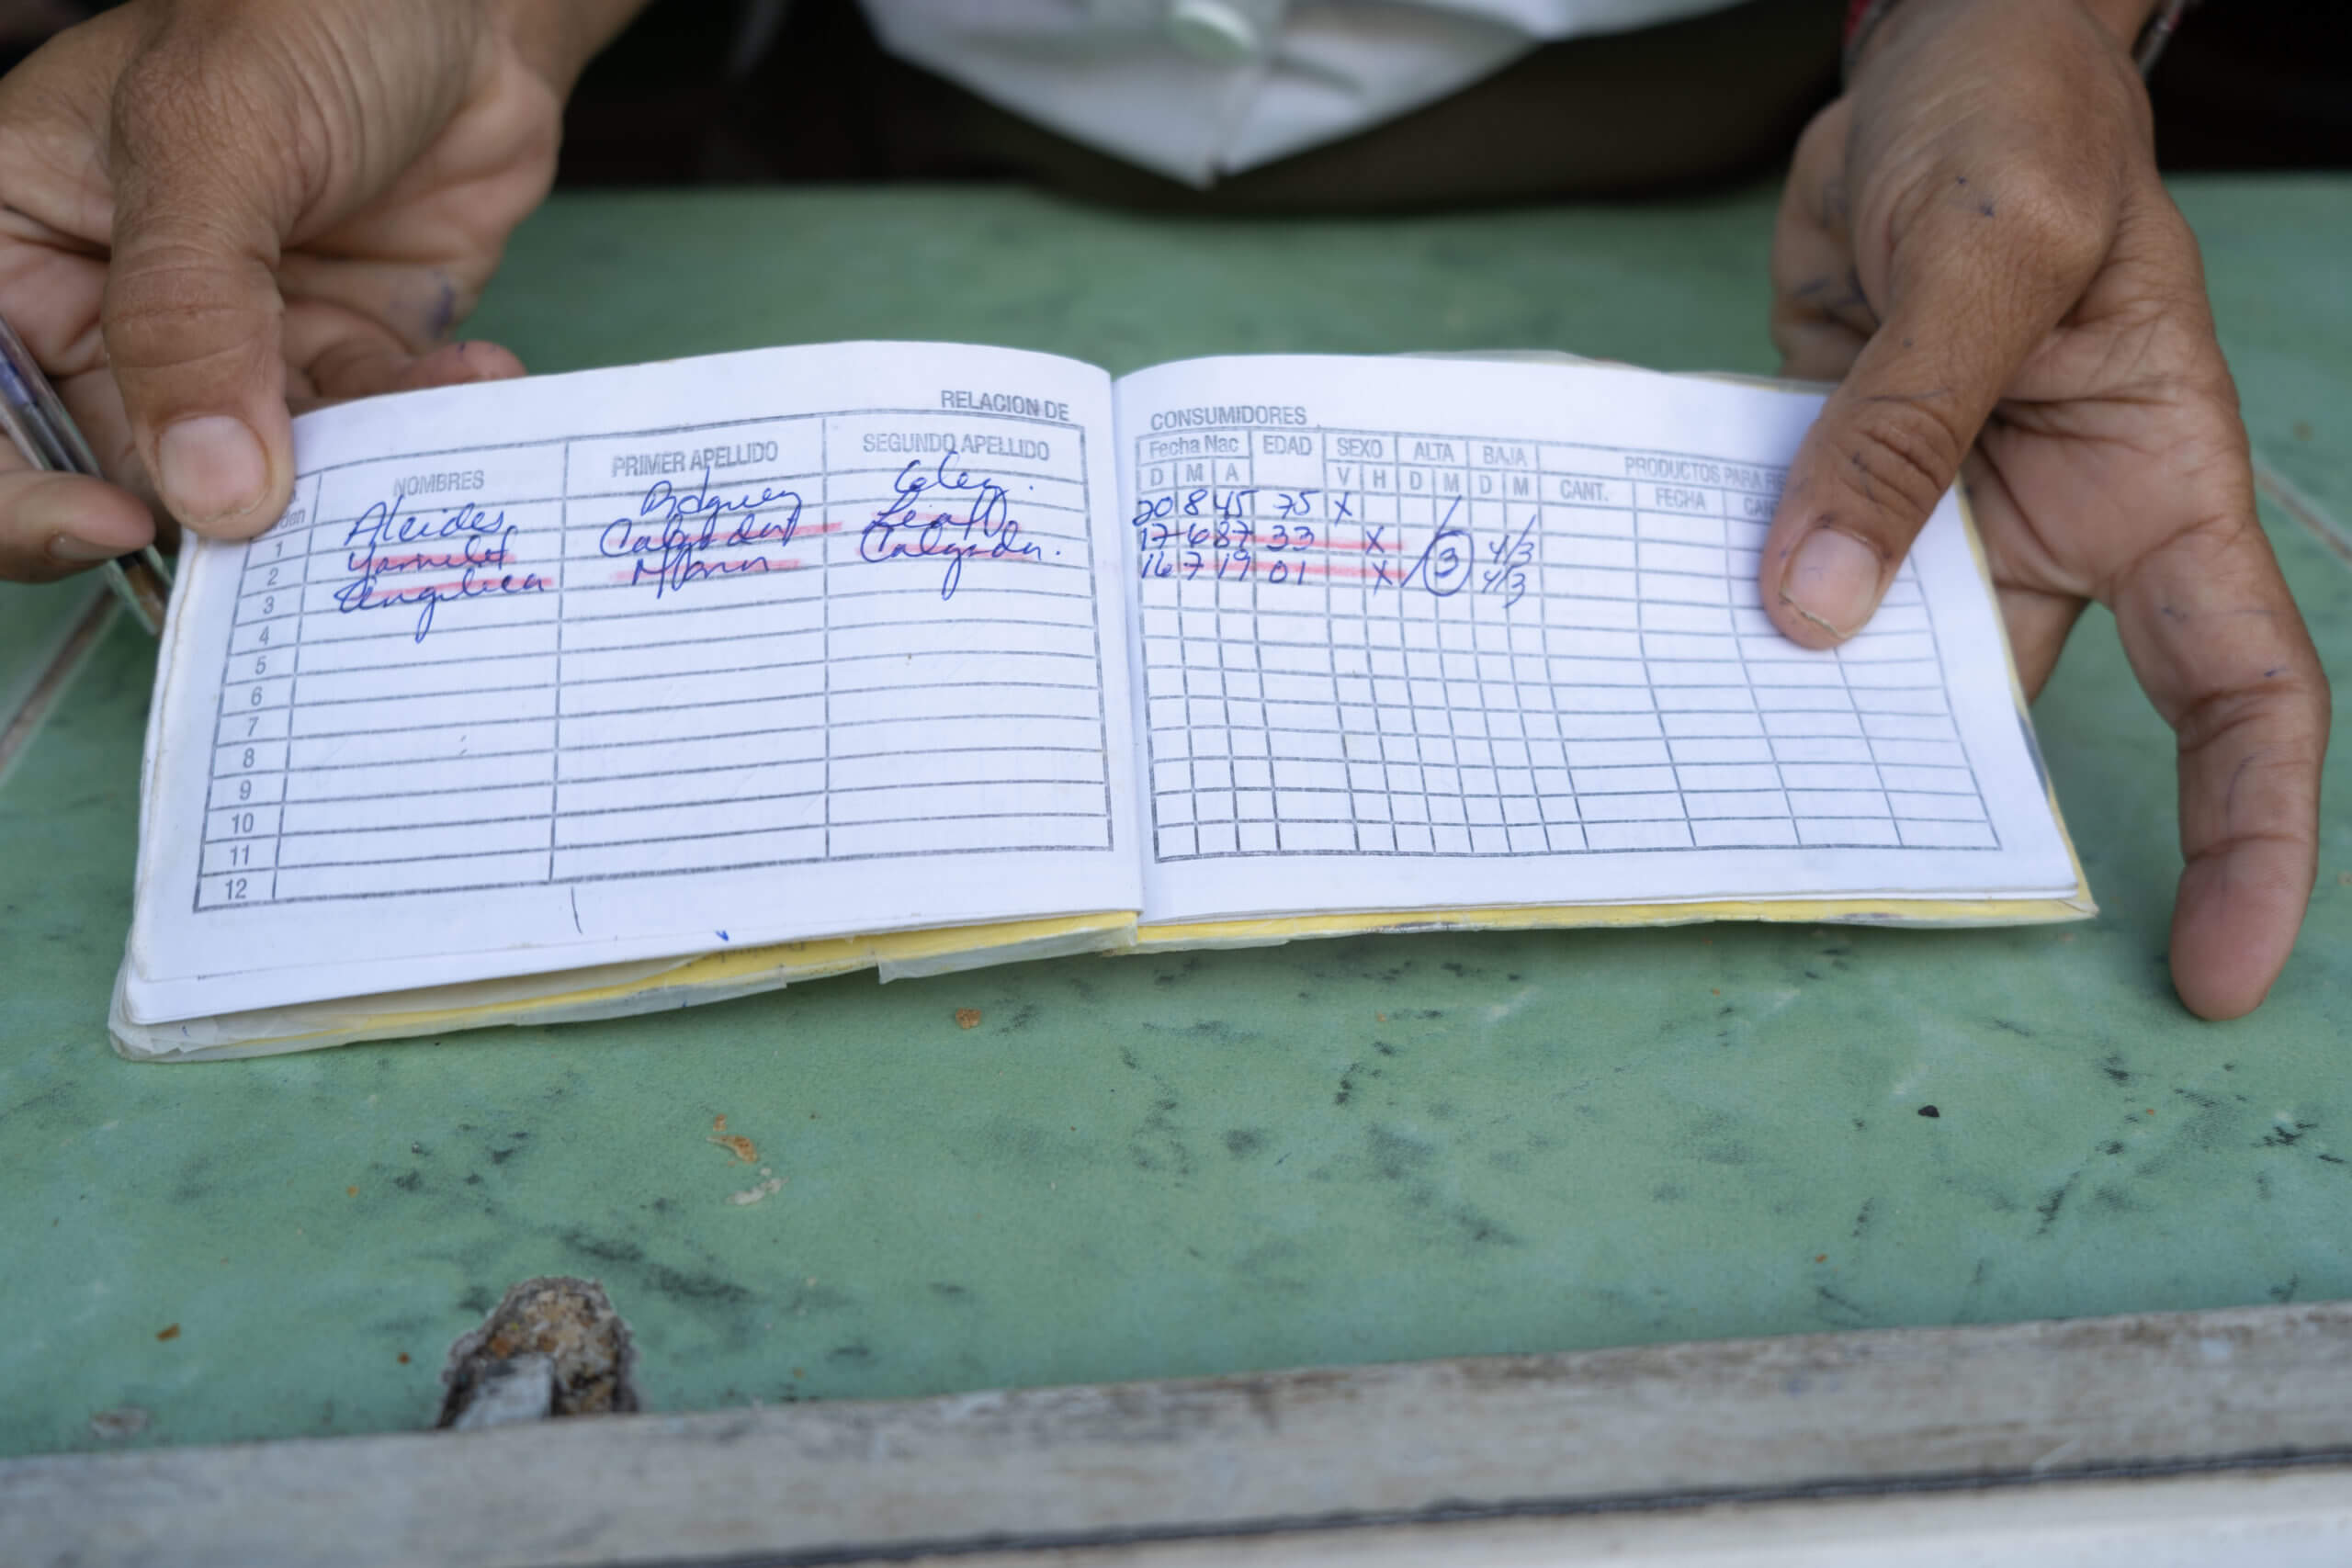 "La libreta," the ration record book required of most Cuban citizens to purchase basic items. Cubans continue to struggle under adverse economic conditions in the face of a decades long blockade. © 2022 John D. Elliott • www.TheHumanPulse.com